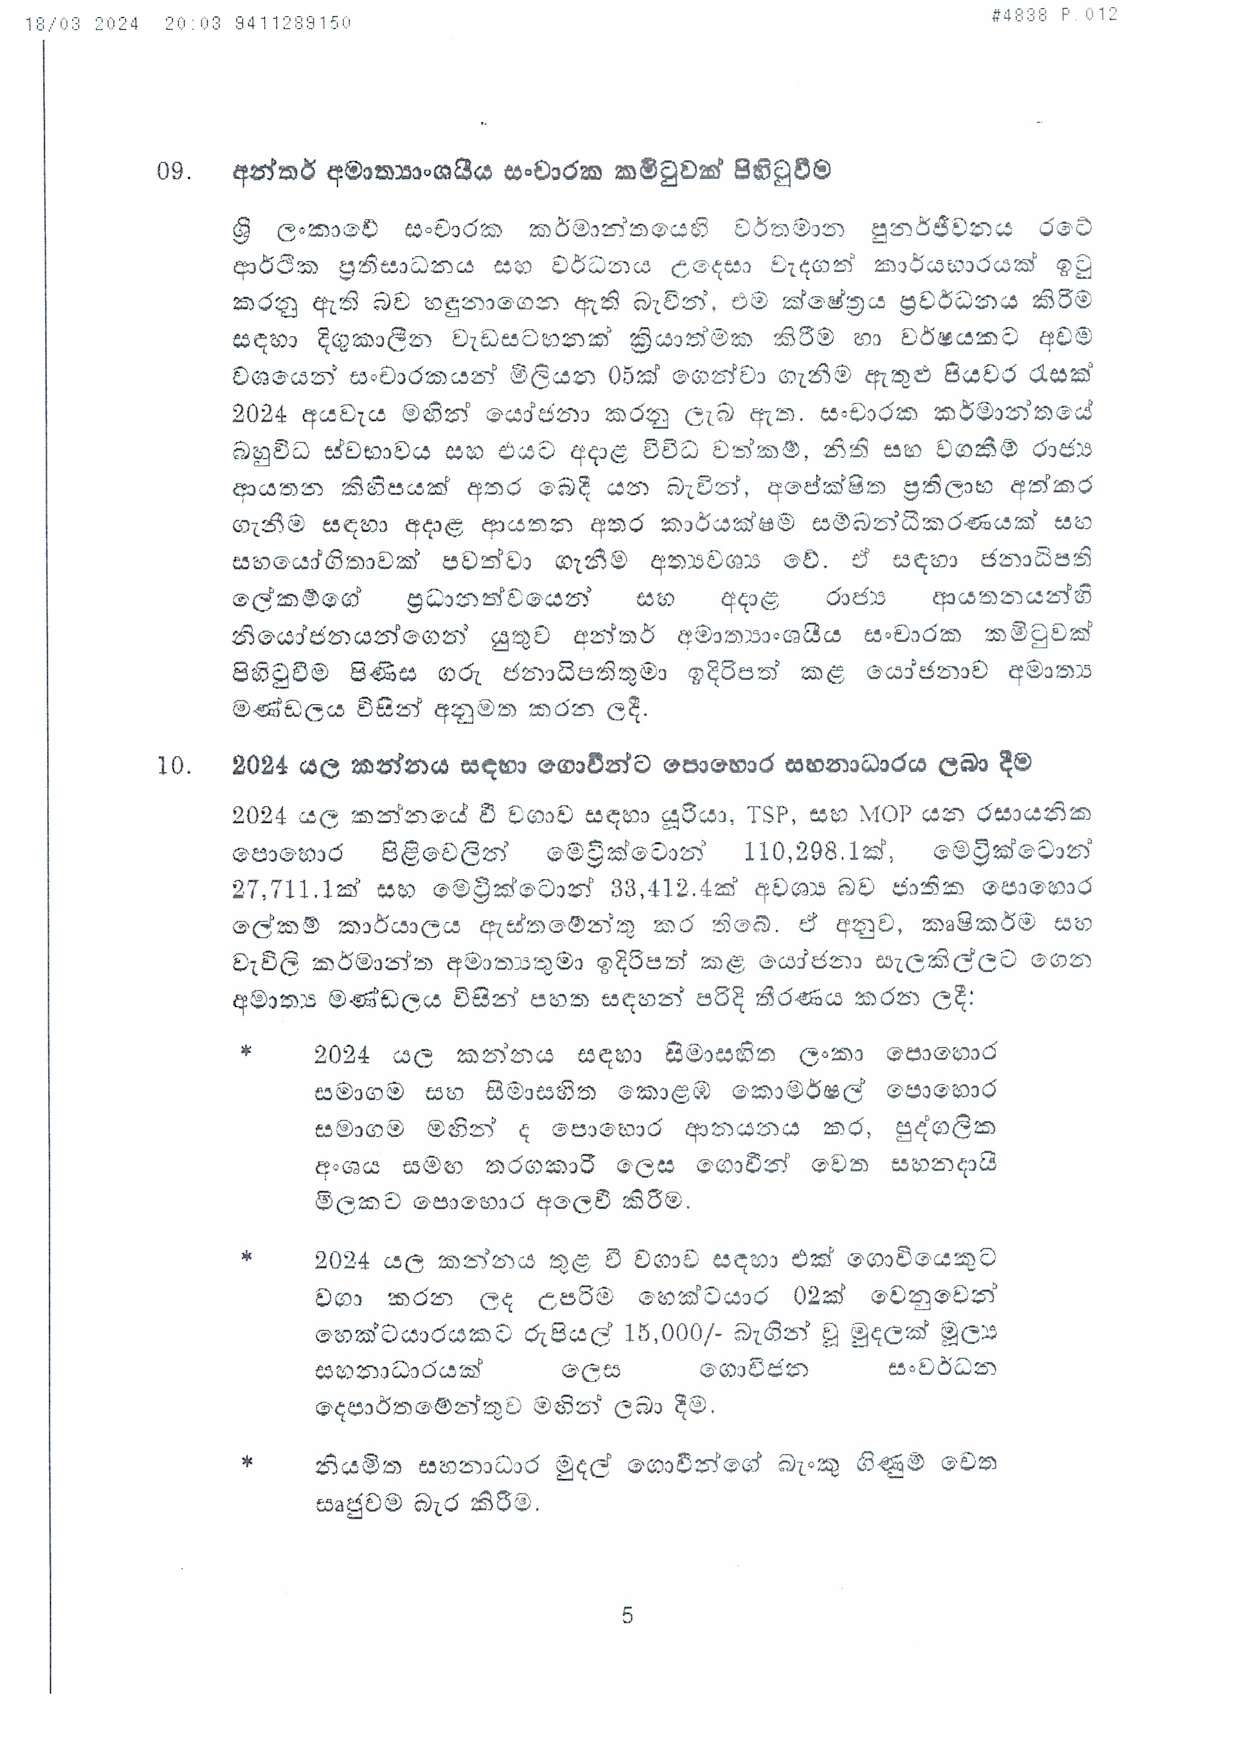 Cabinet Decisions on 18.03.2024 compressed page 0005